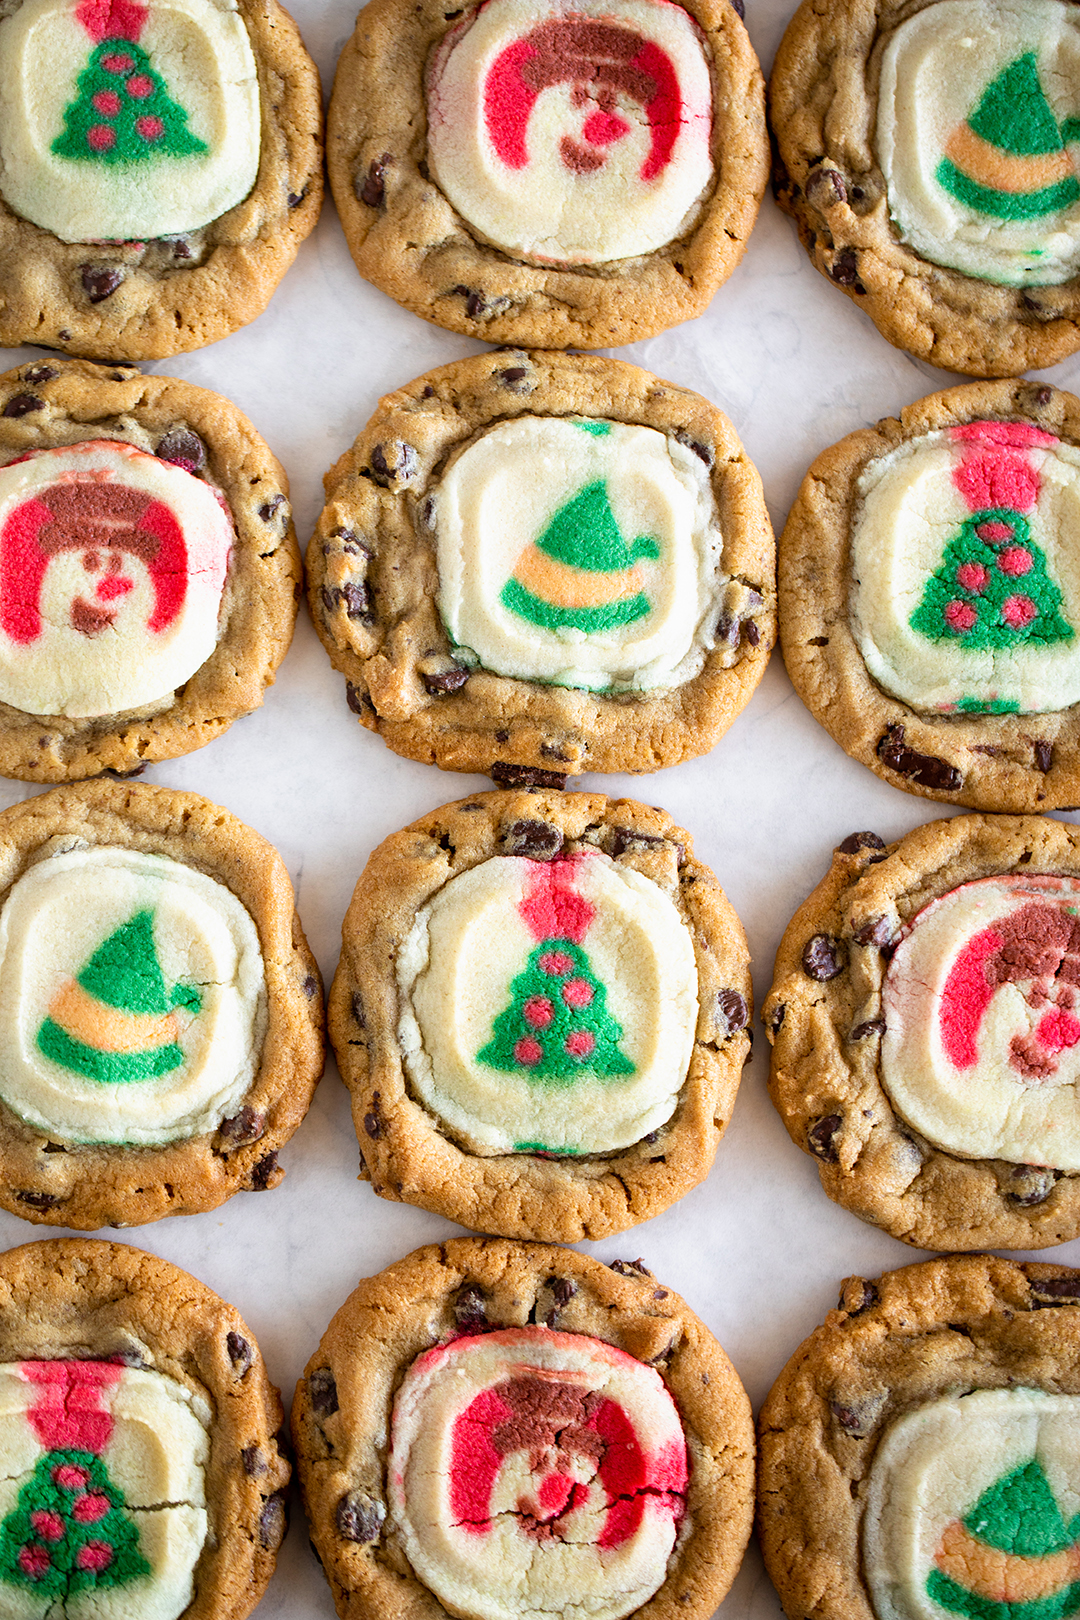 https://www.number-2-pencil.com/wp-content/uploads/2022/12/Christmas-Chocolate-Chip-Sugar-Cookies-8.jpg